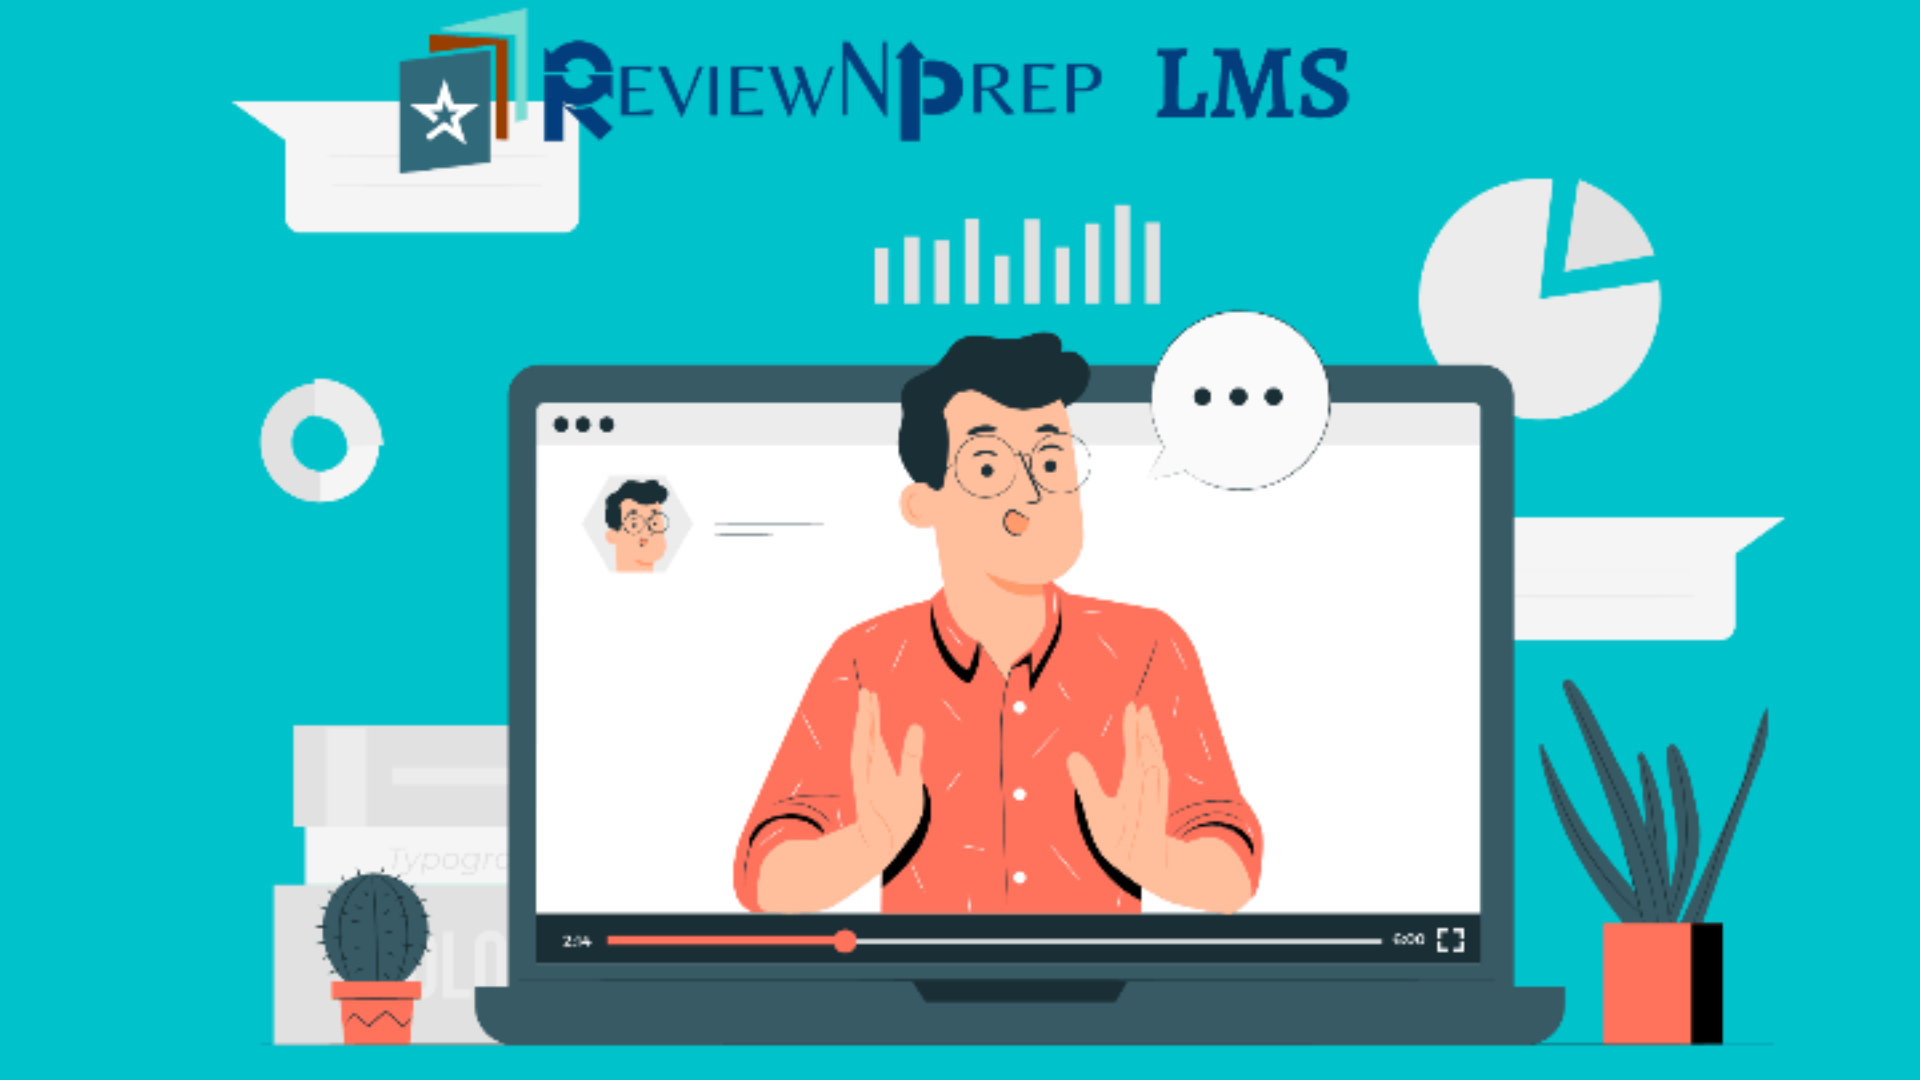 Lifetime Deal to ReviewNPrep LMS: Plan A for $80